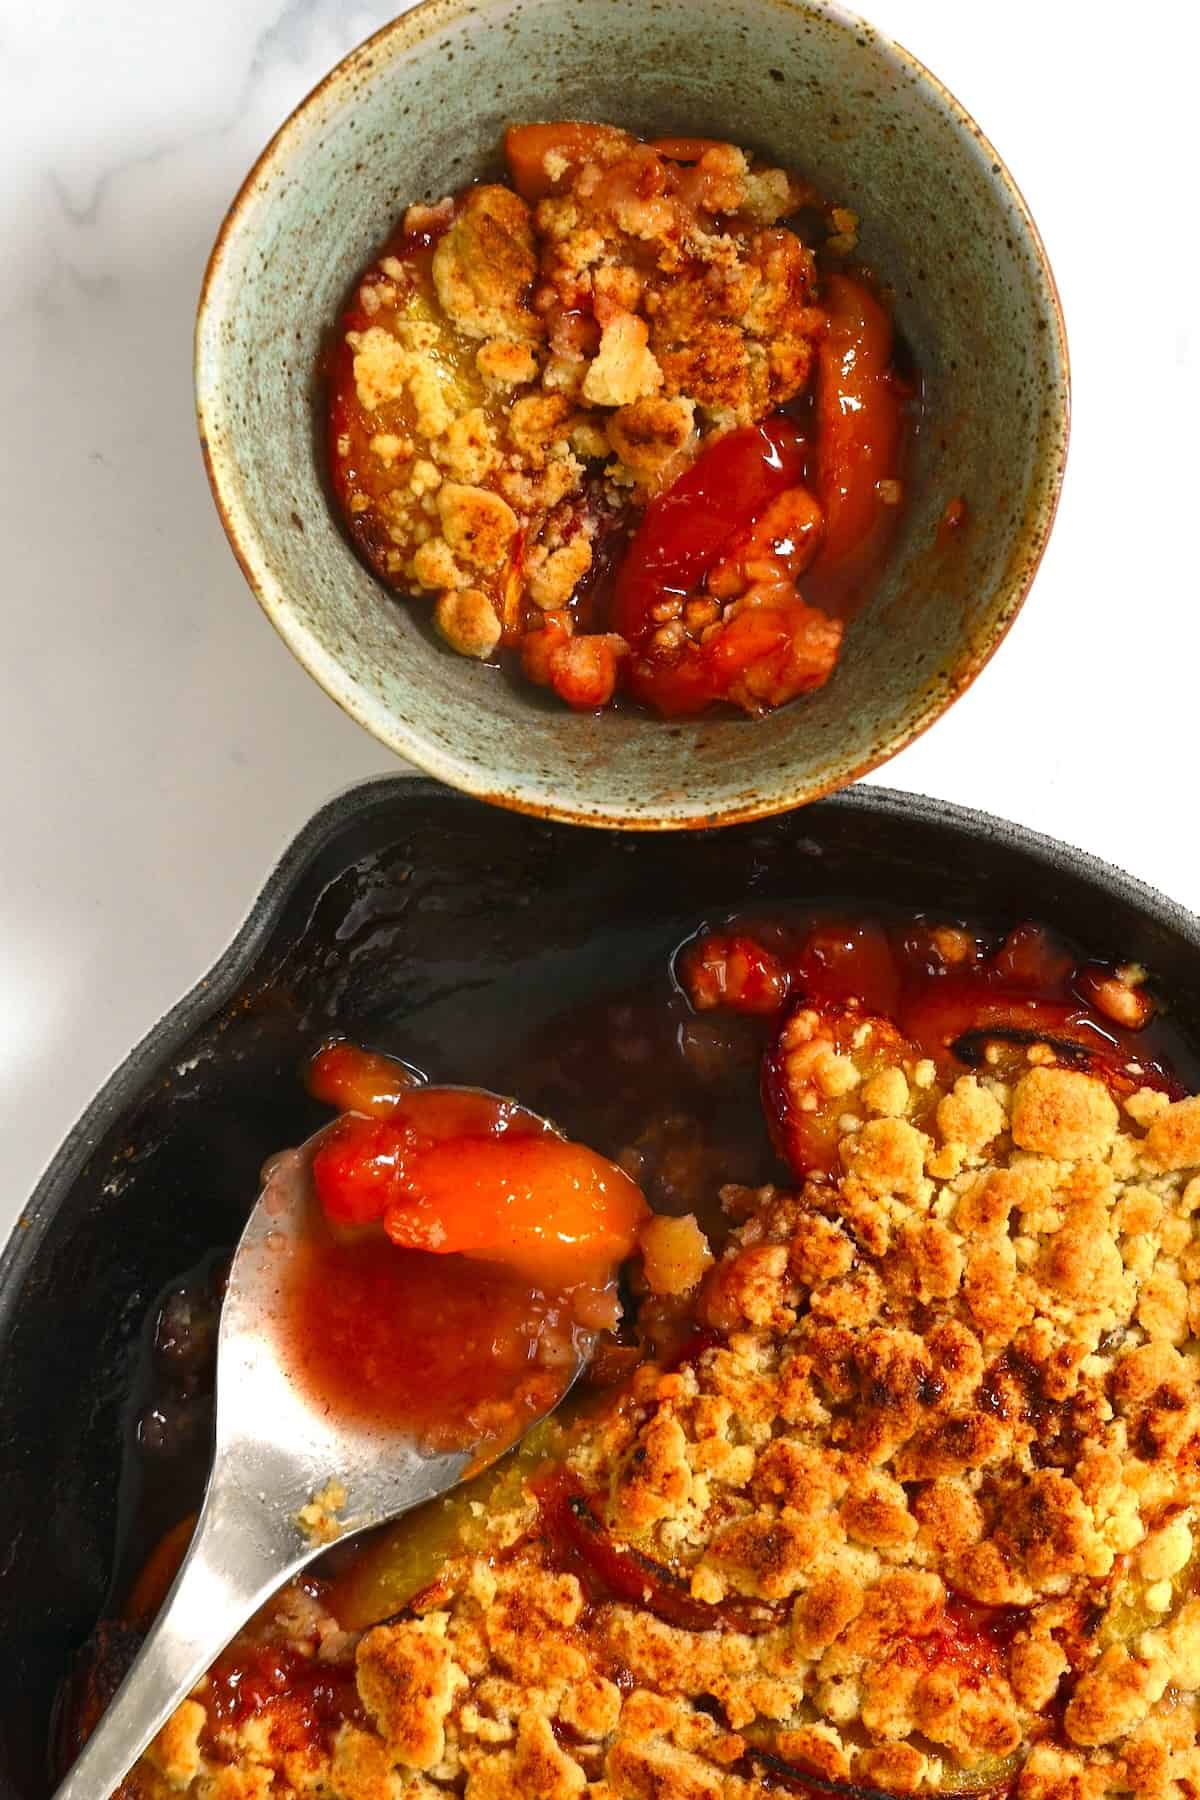 A serving of peach crumble